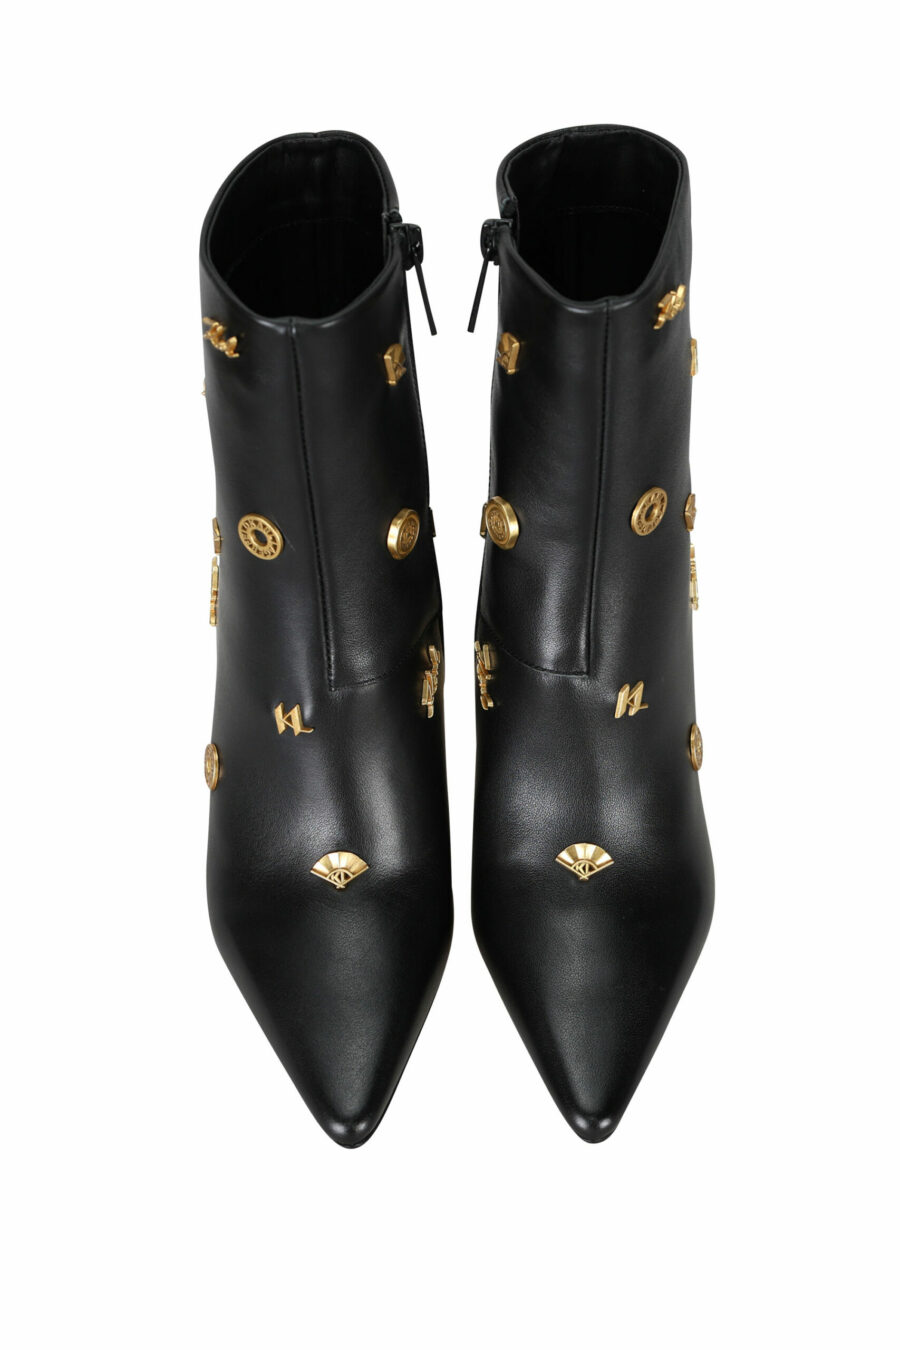 Black ankle boots with gold heel and pins - 5059529282034 4 scaled